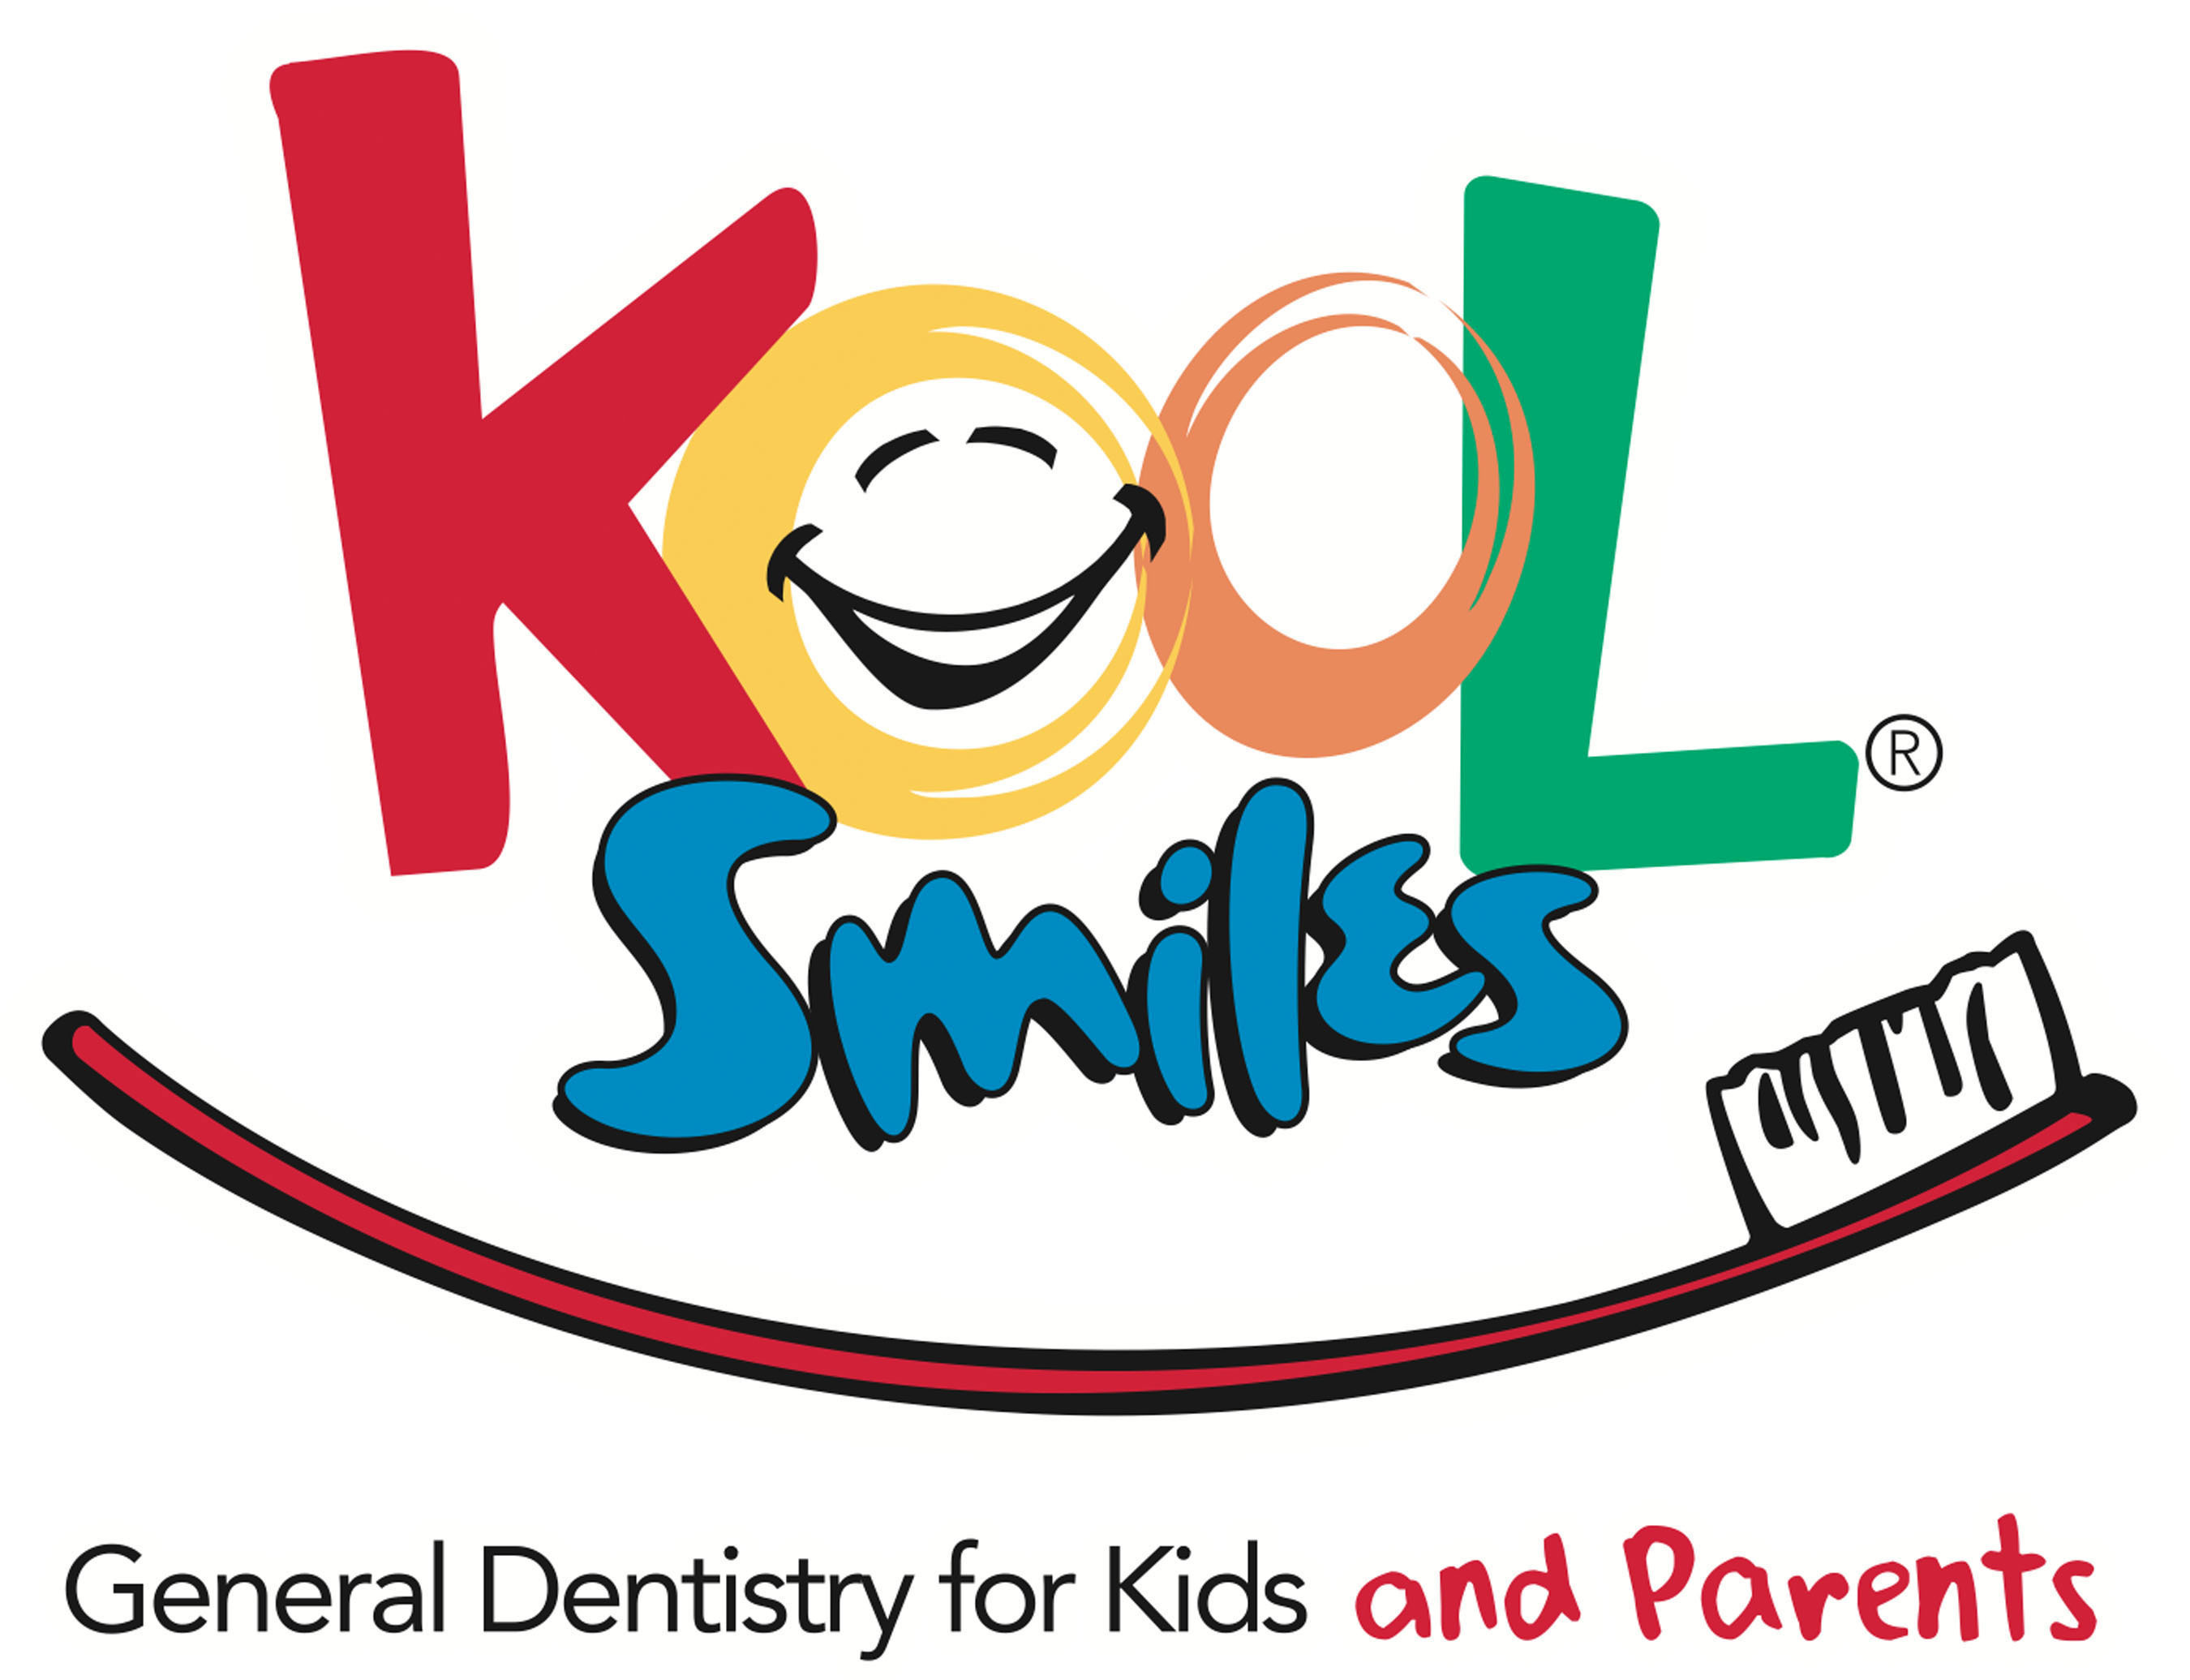 Kool Smiles is a general dentist for kids and their family.